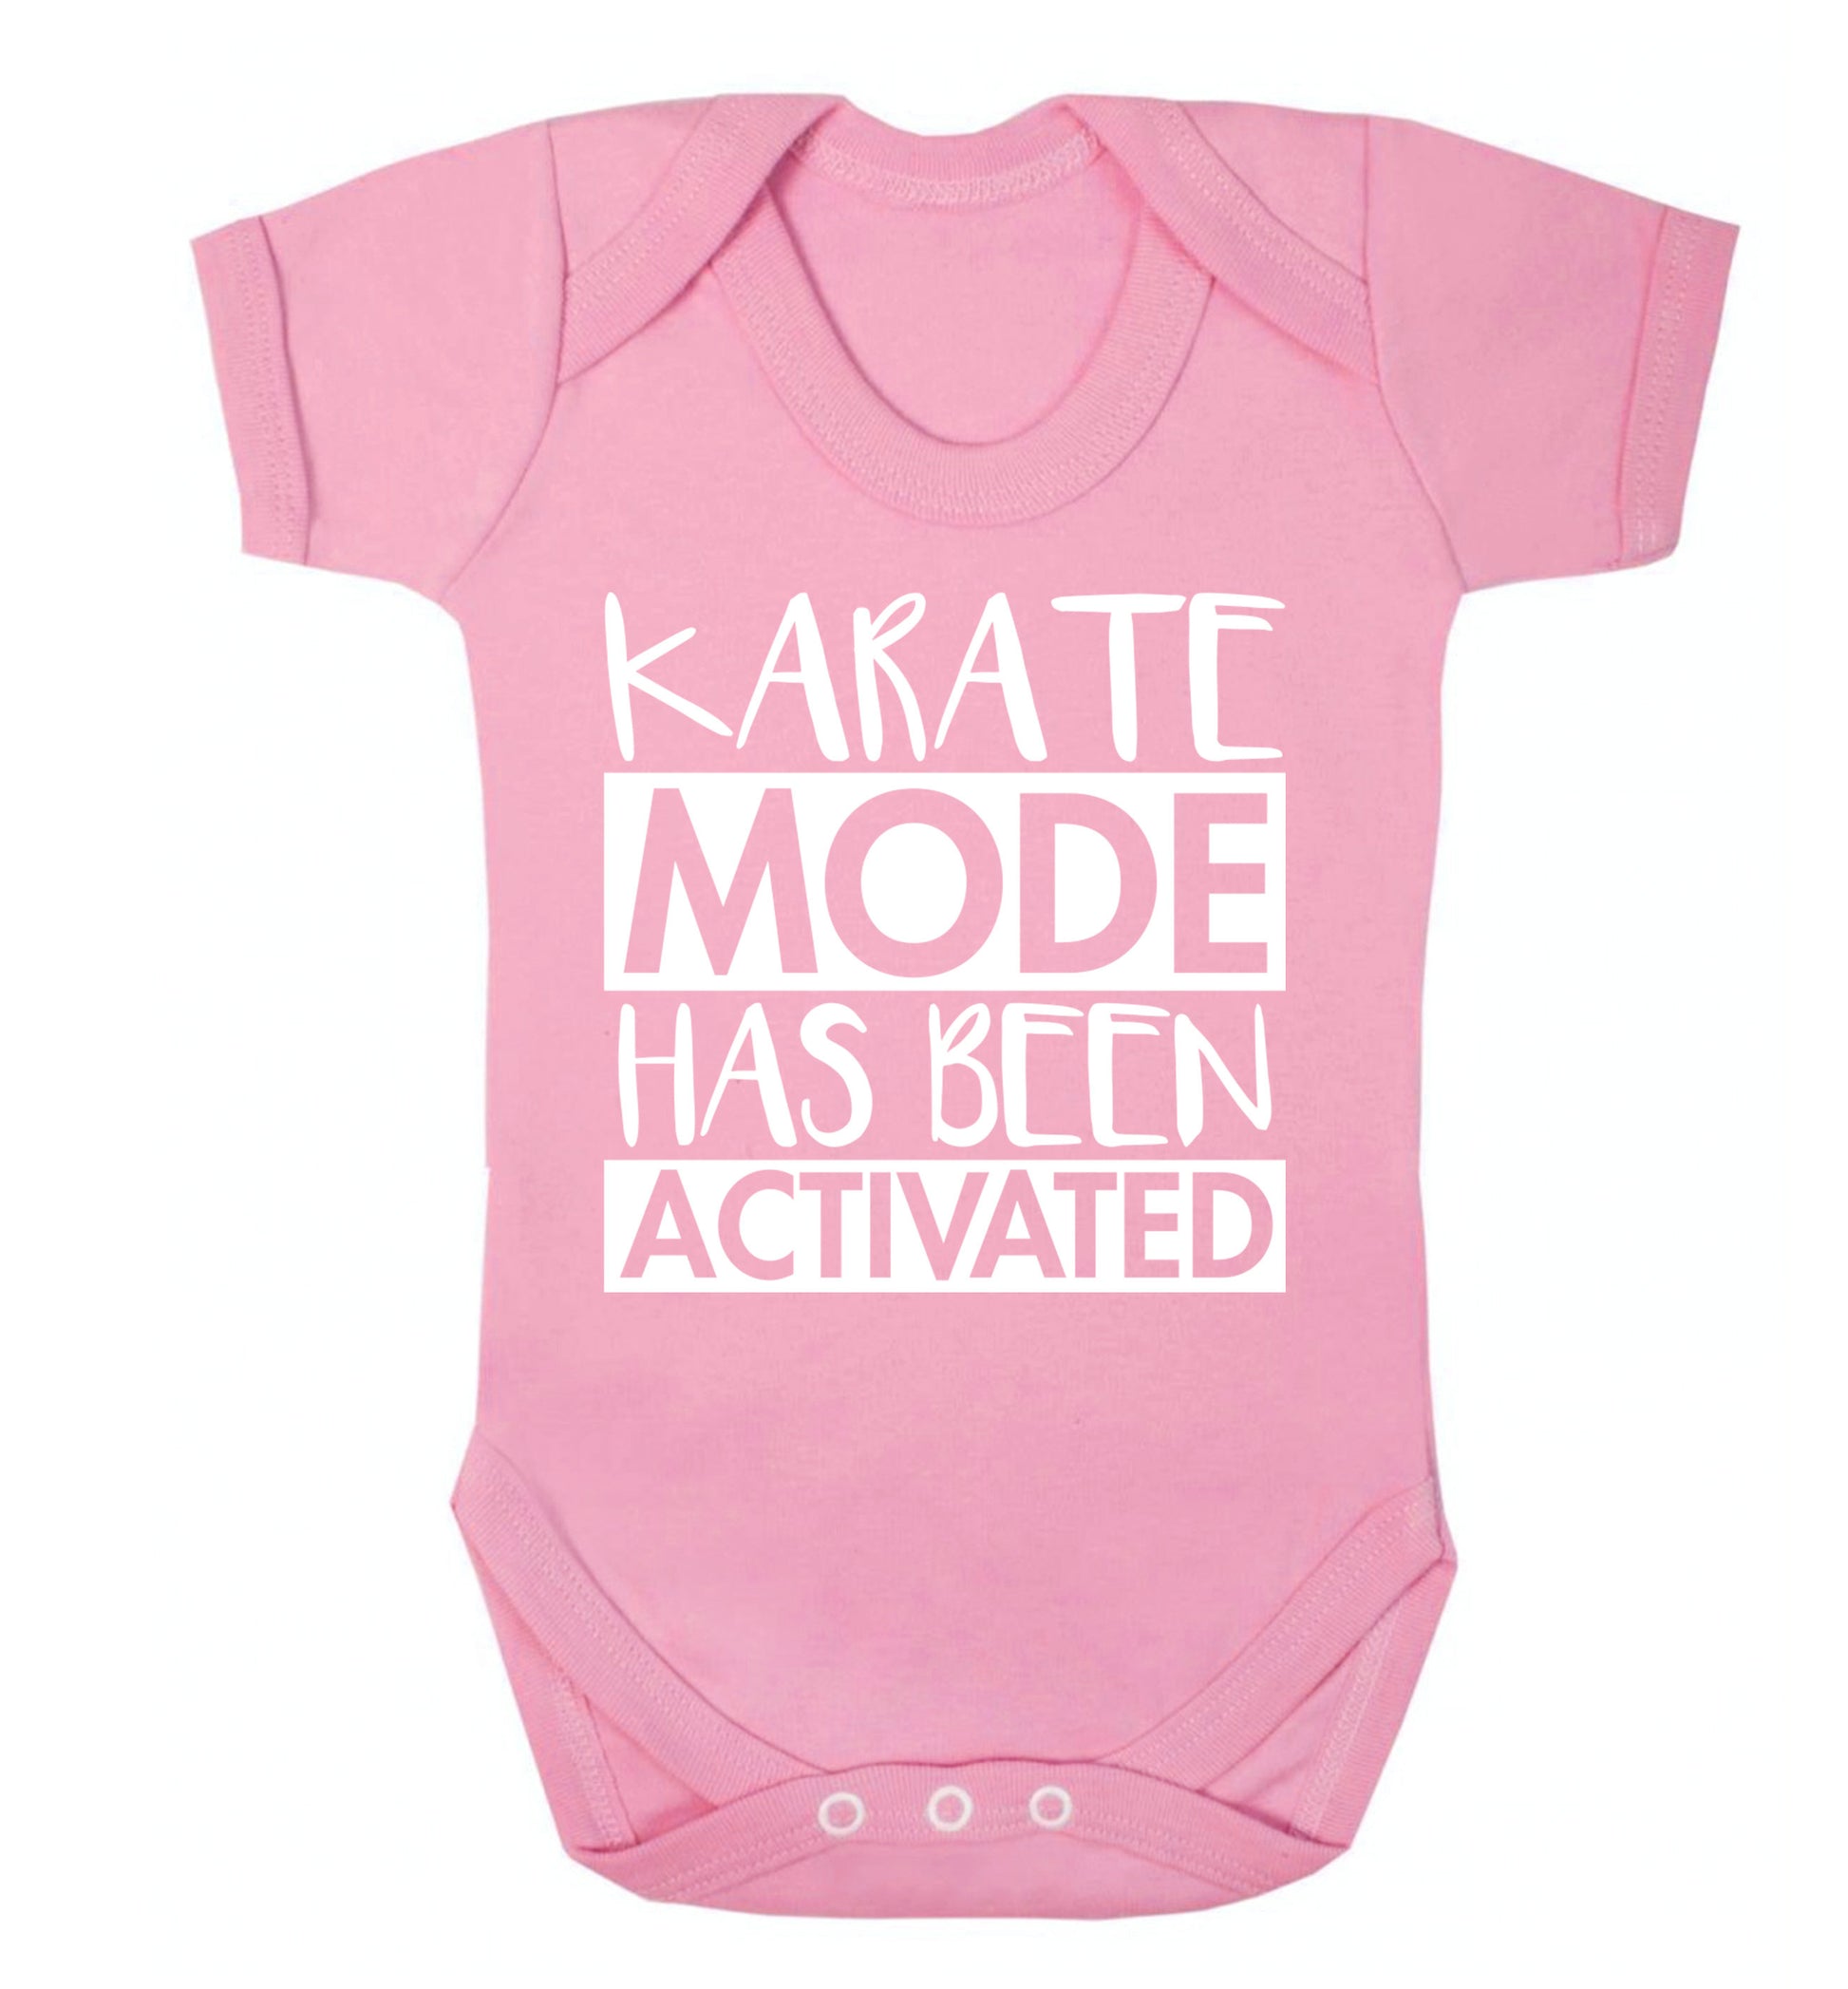 Karate mode activated Baby Vest pale pink 18-24 months